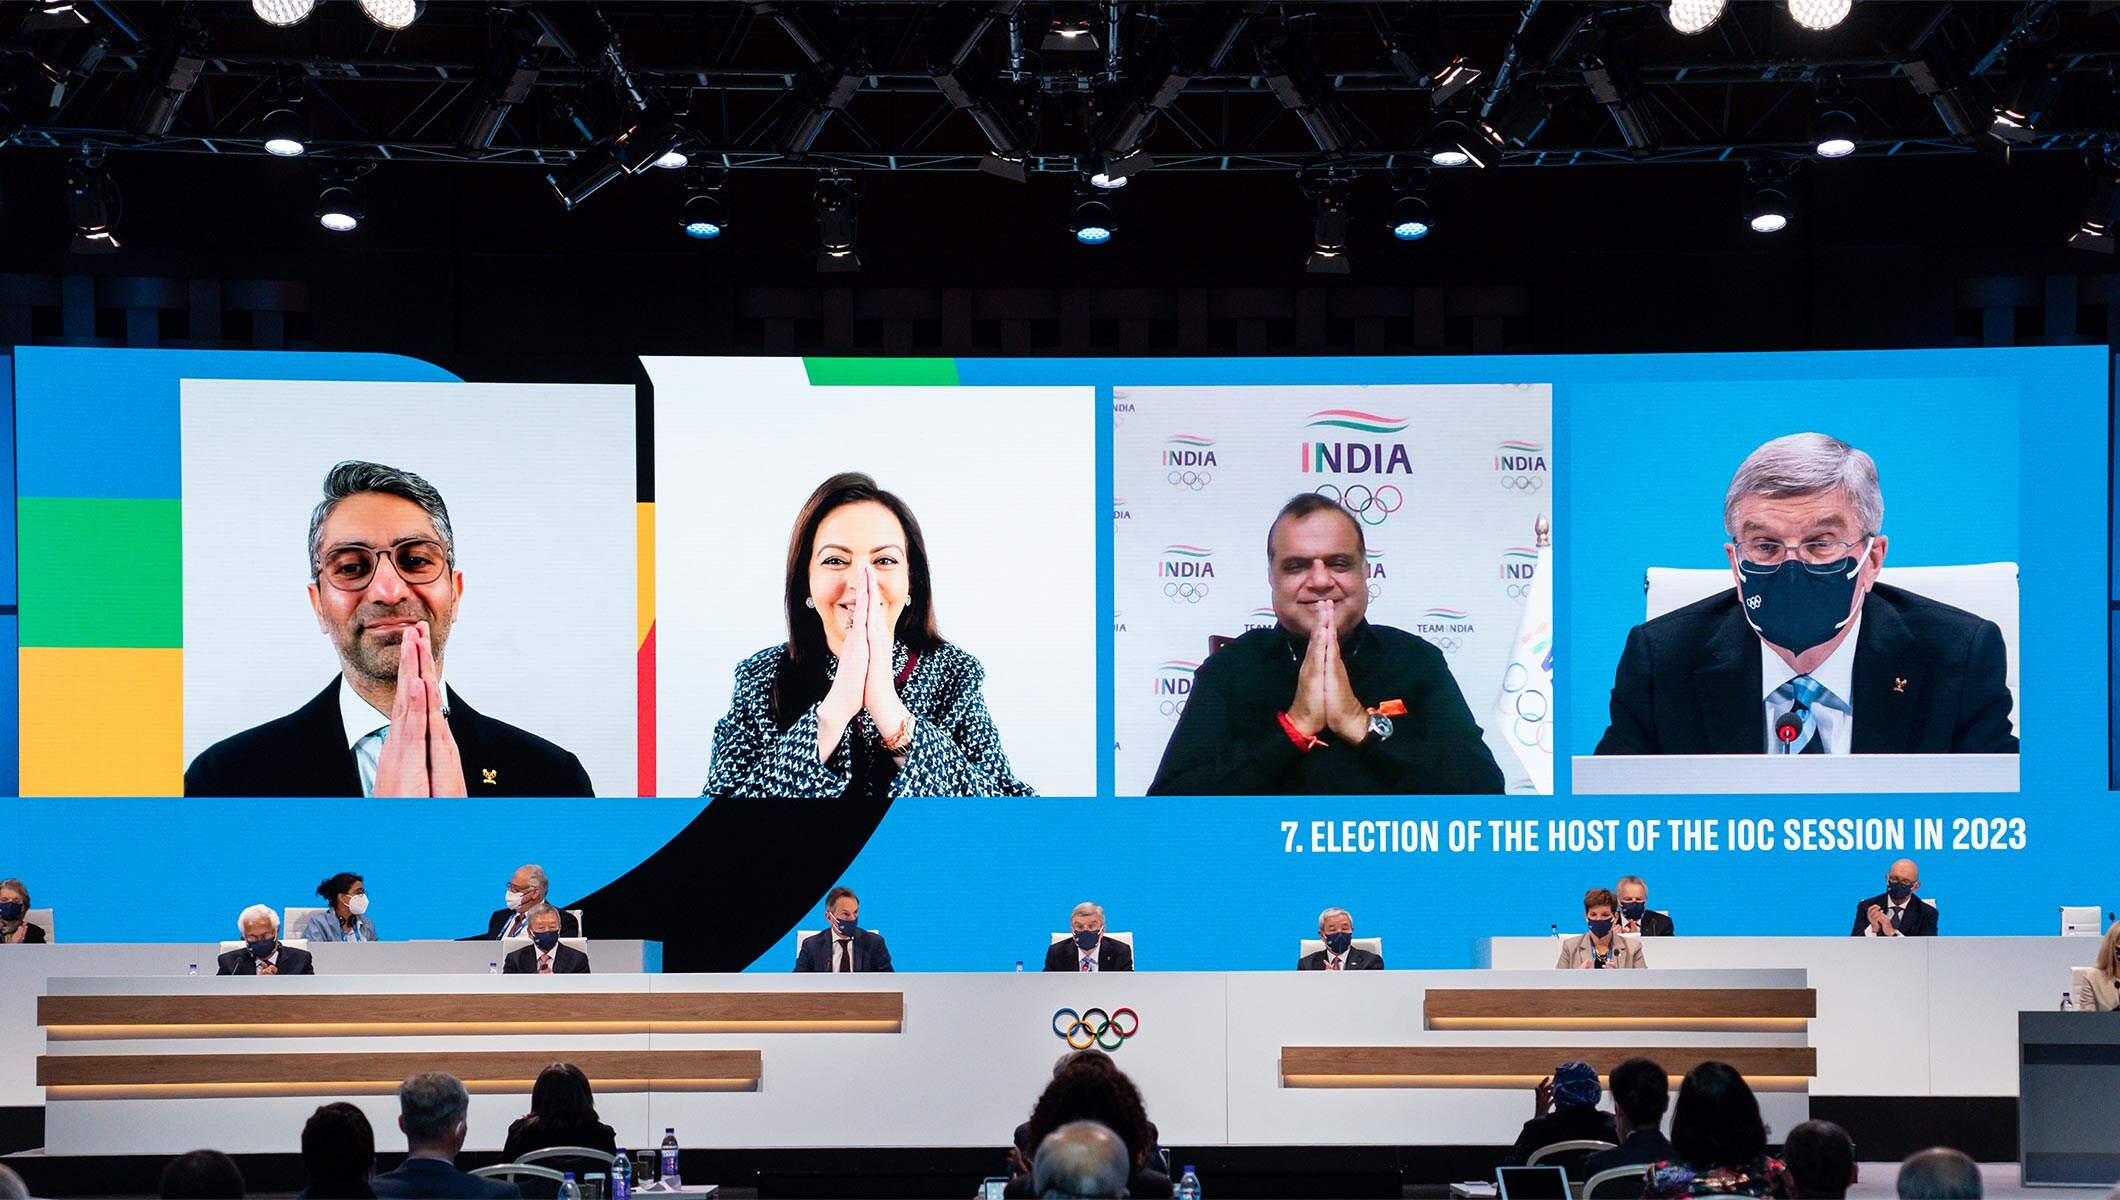 Voting takes place to decide if Mumbai will host the 2023 session, during the 139th IOC Session